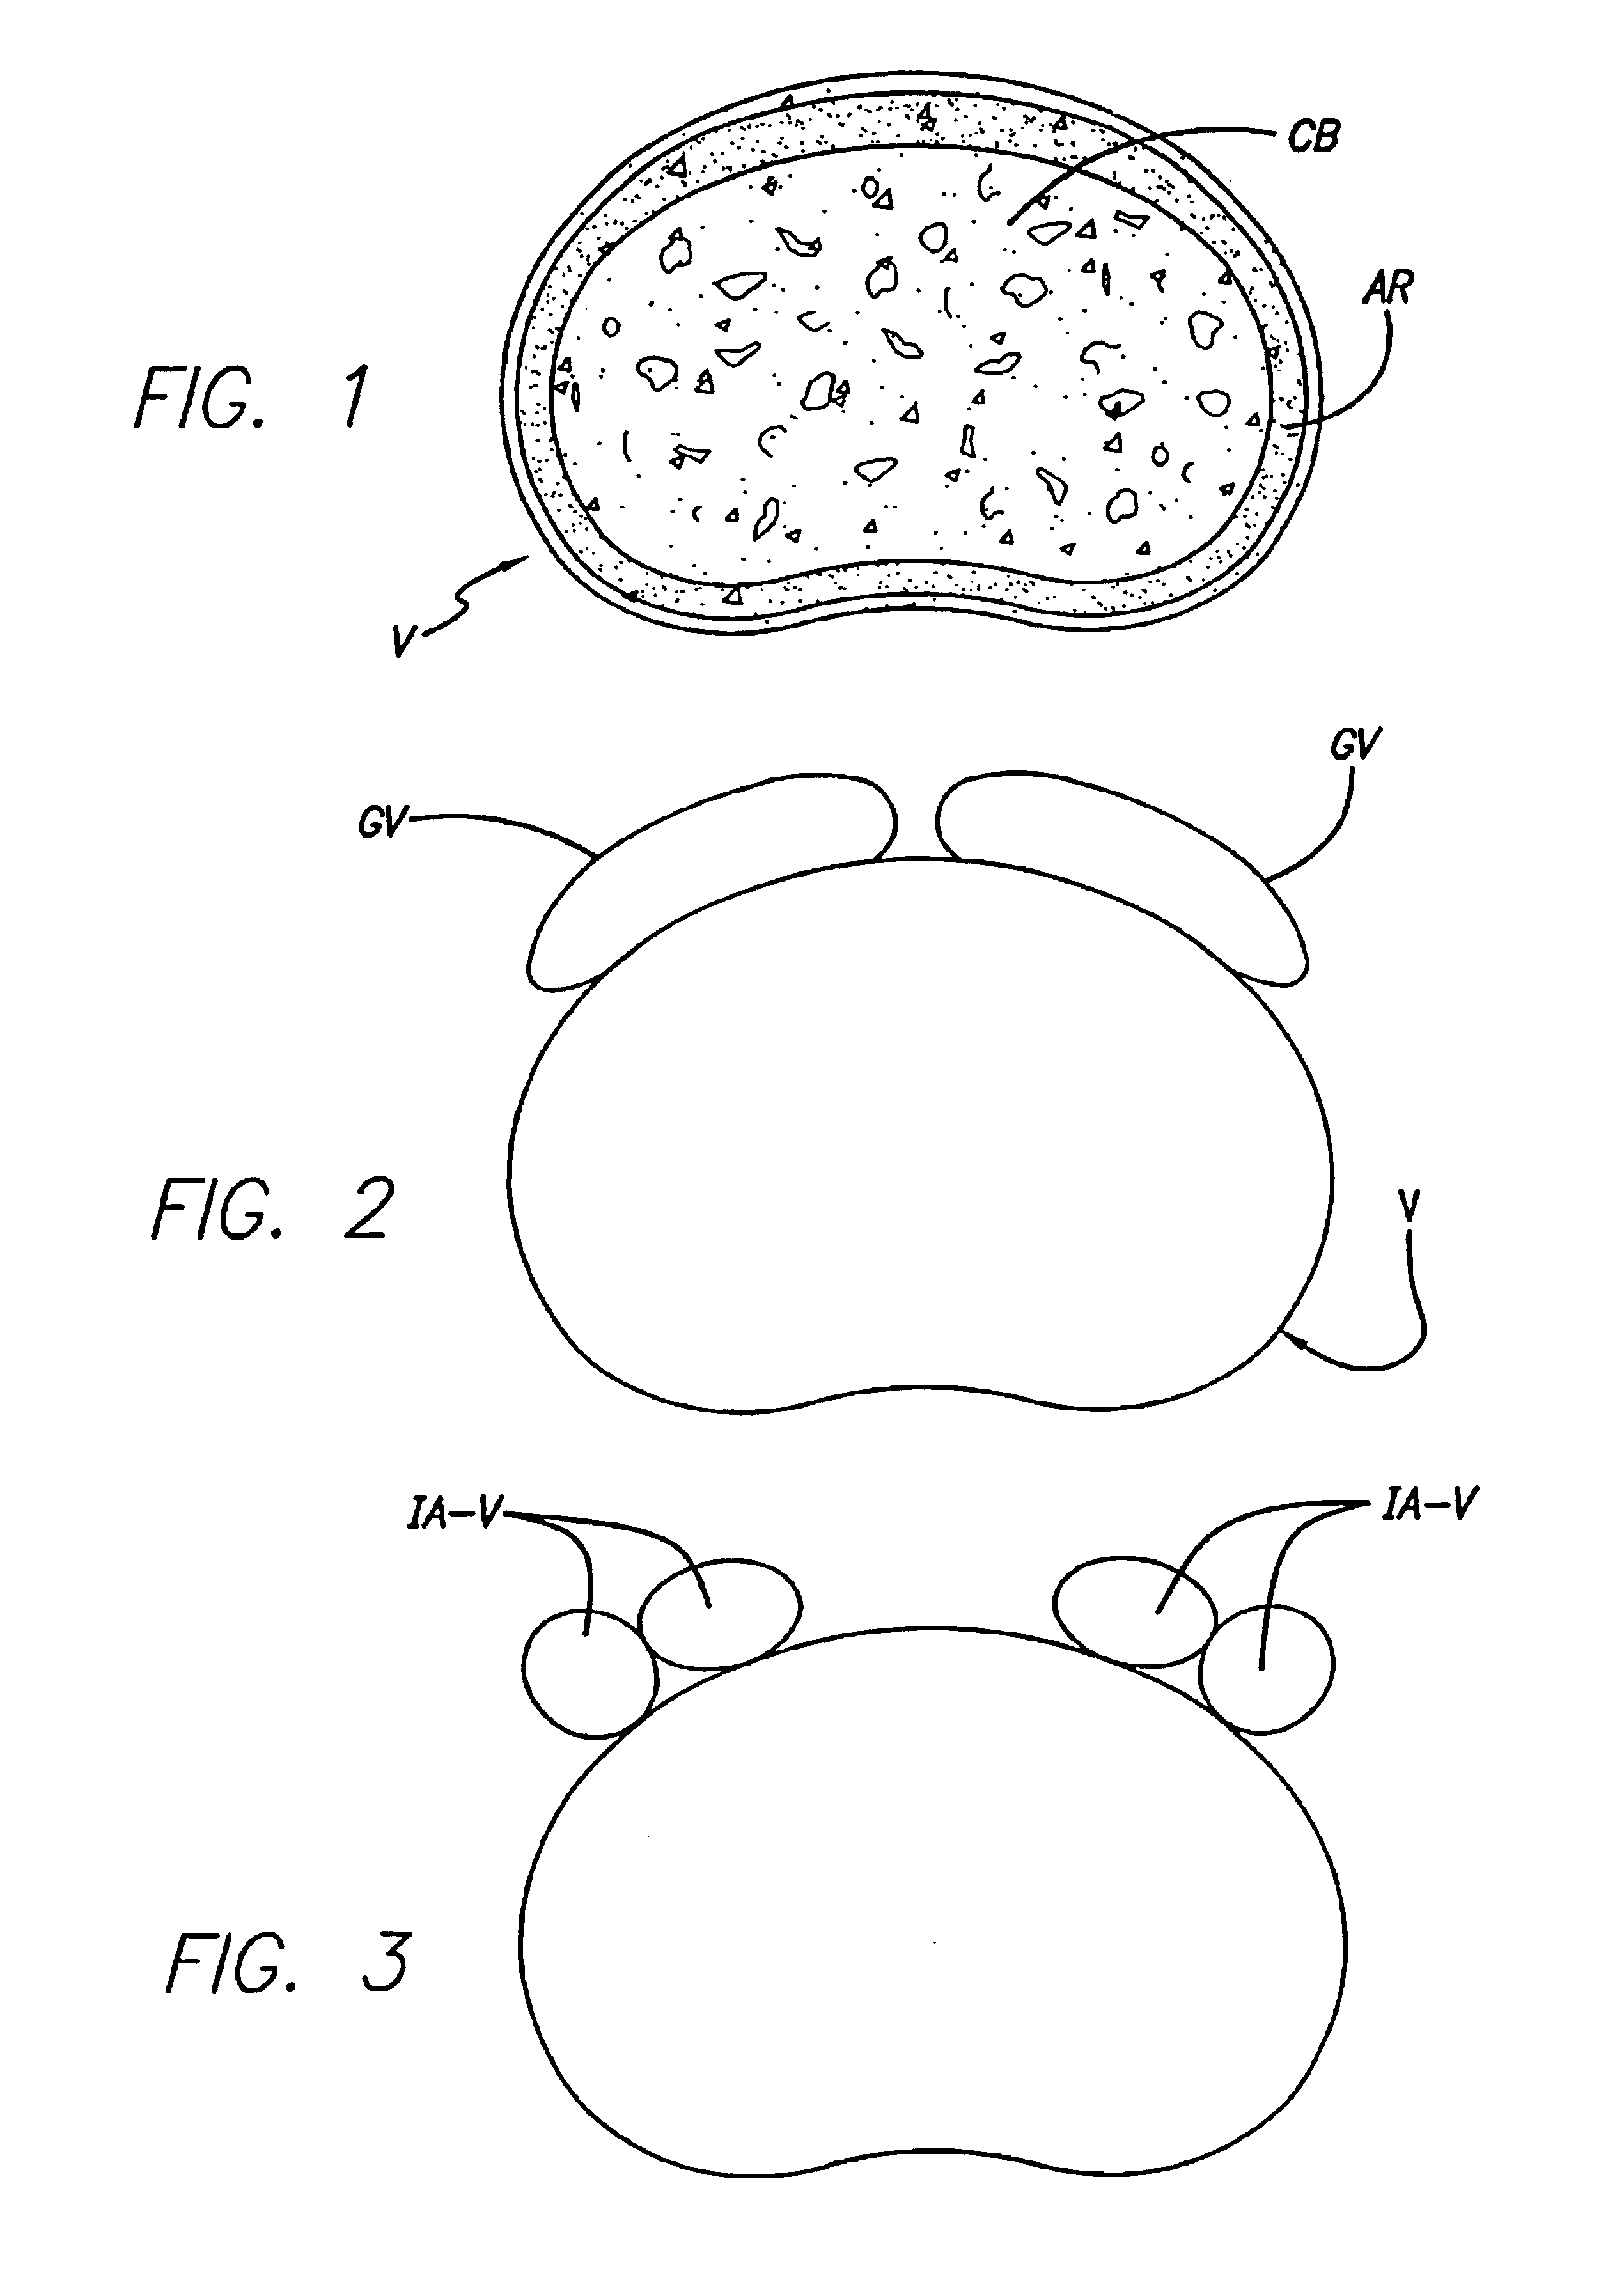 Bone hemi-lumbar interbody spinal fusion implant having an asymmetrical leading end and method of installation thereof